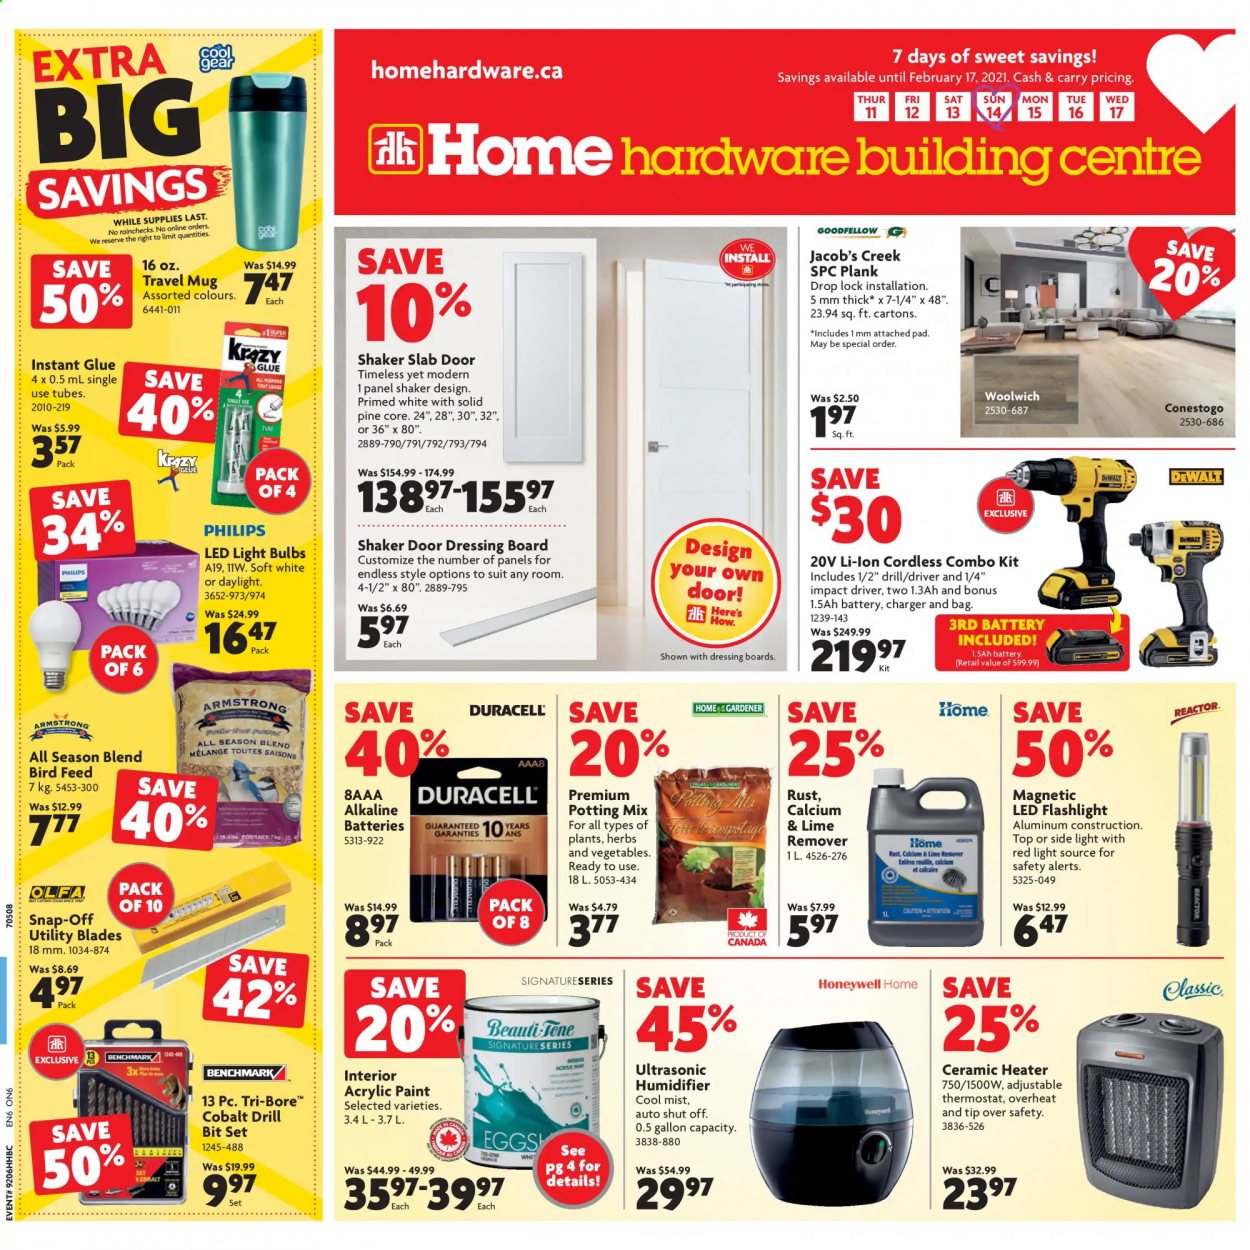 thumbnail - Home Hardware Building Centre Flyer - February 11, 2021 - February 17, 2021 - Sales products - Honeywell, humidifier, glue, paint, LED light, cordless combo kit, DeWALT, impact driver, drill bit set, combo kit, herbs, potting mix. Page 1.